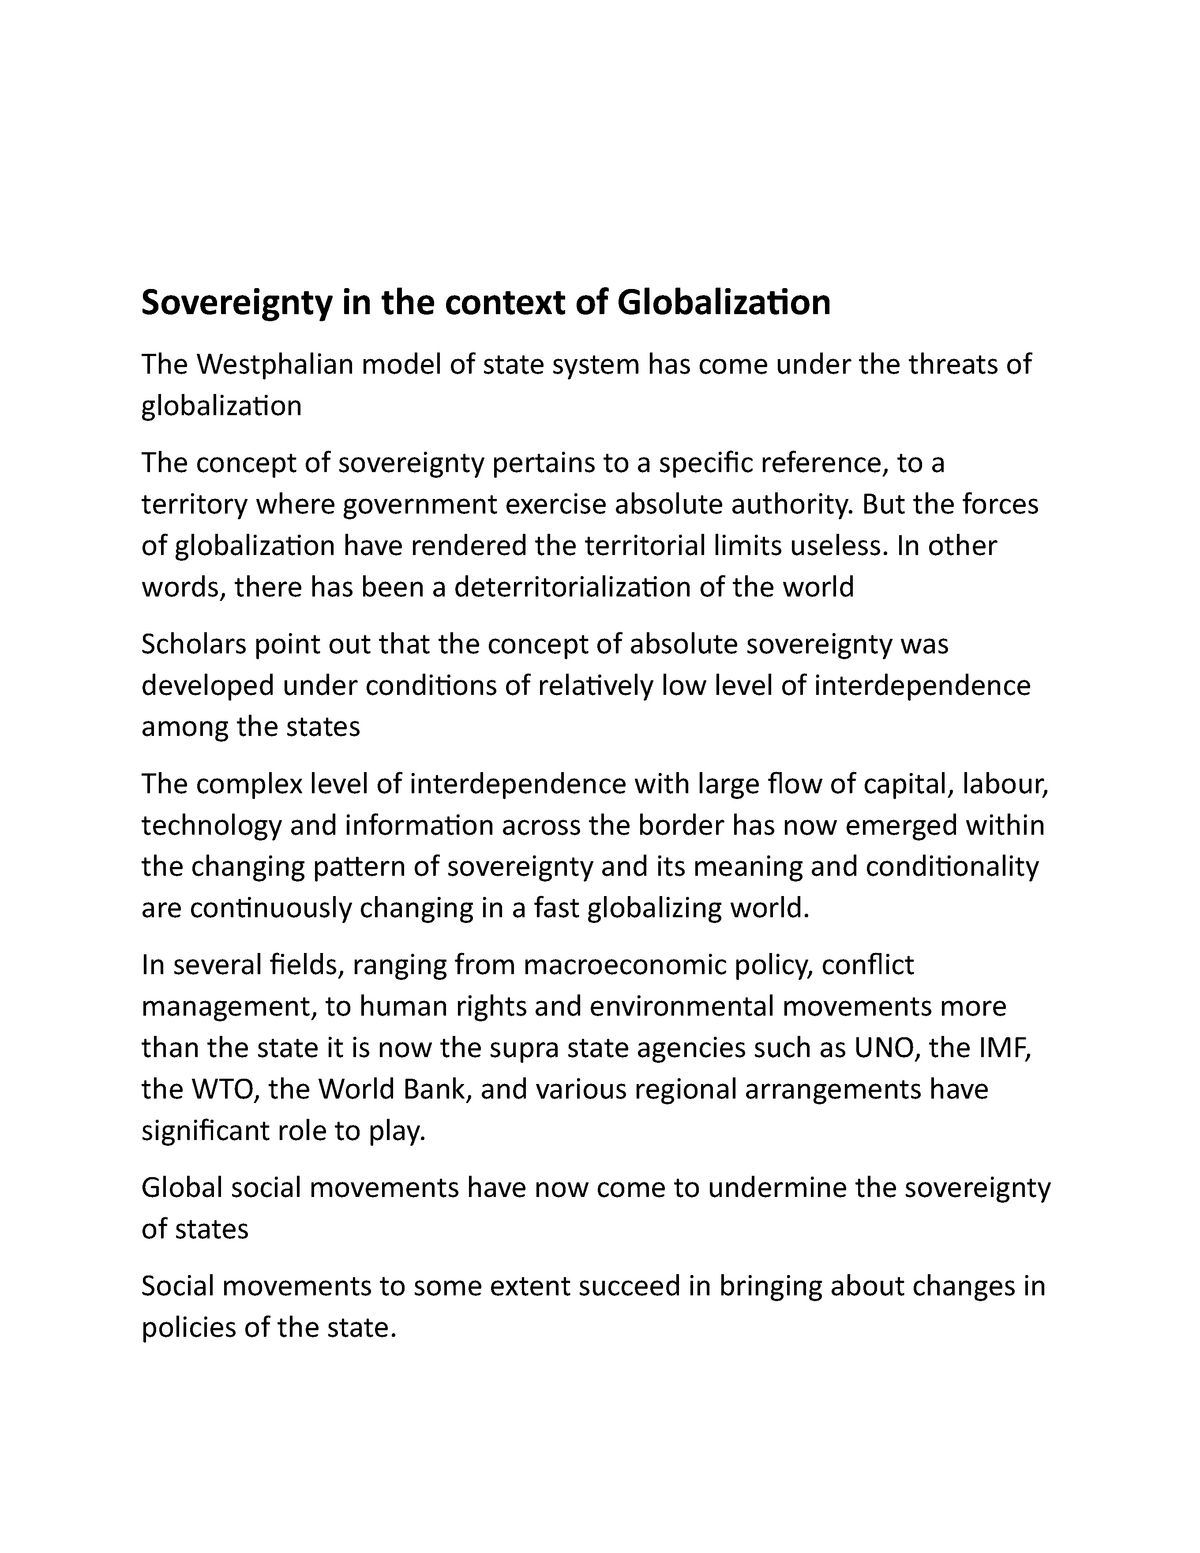 globalization and sovereignty essay